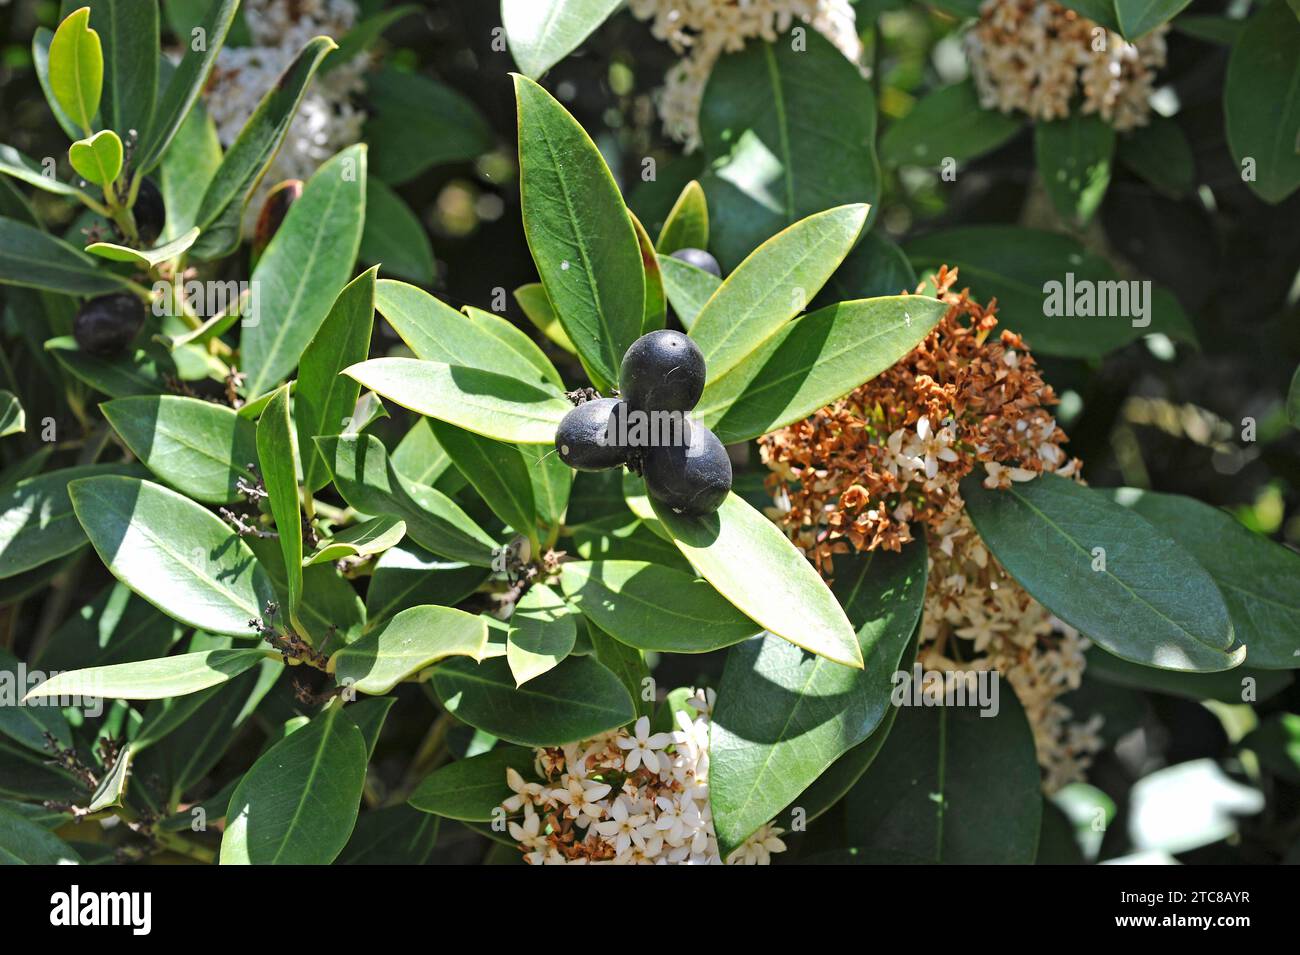 African wintersweet or Hottentot's poison (Acokanthera spectabilis or Acokanthera oblongifolia) is a poisonous small tree native to southern Africa. F Stock Photo